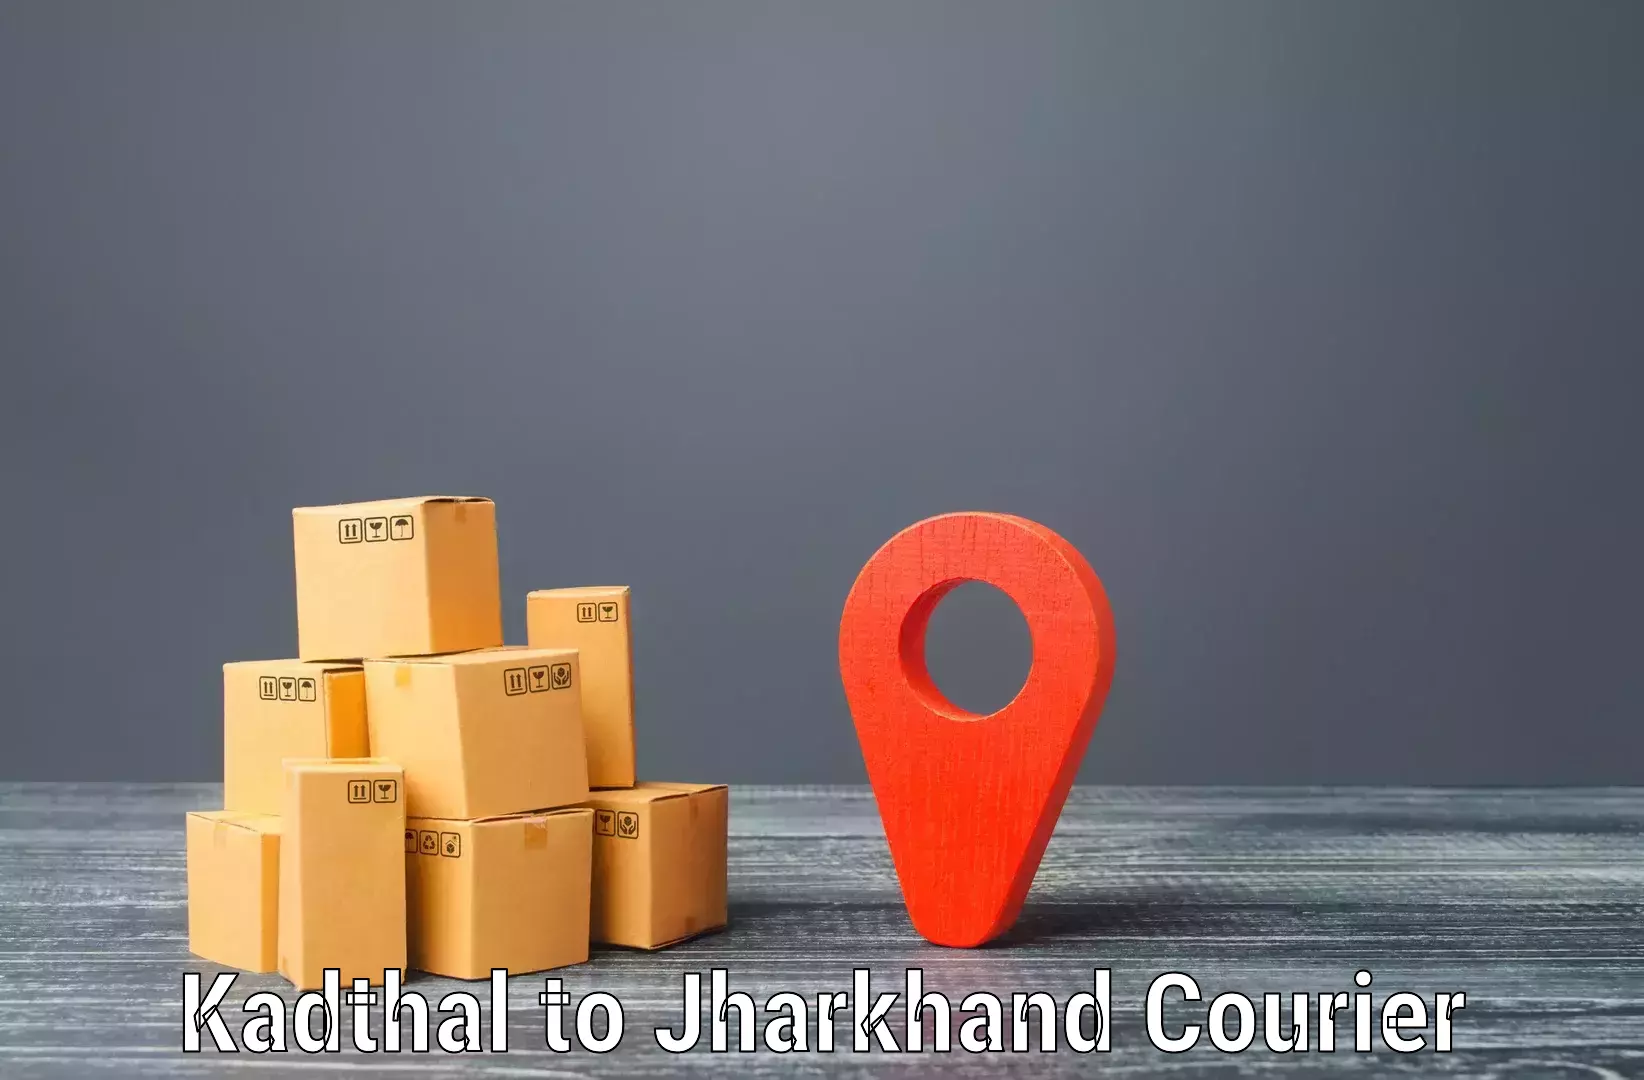 Overnight delivery services Kadthal to Hazaribagh